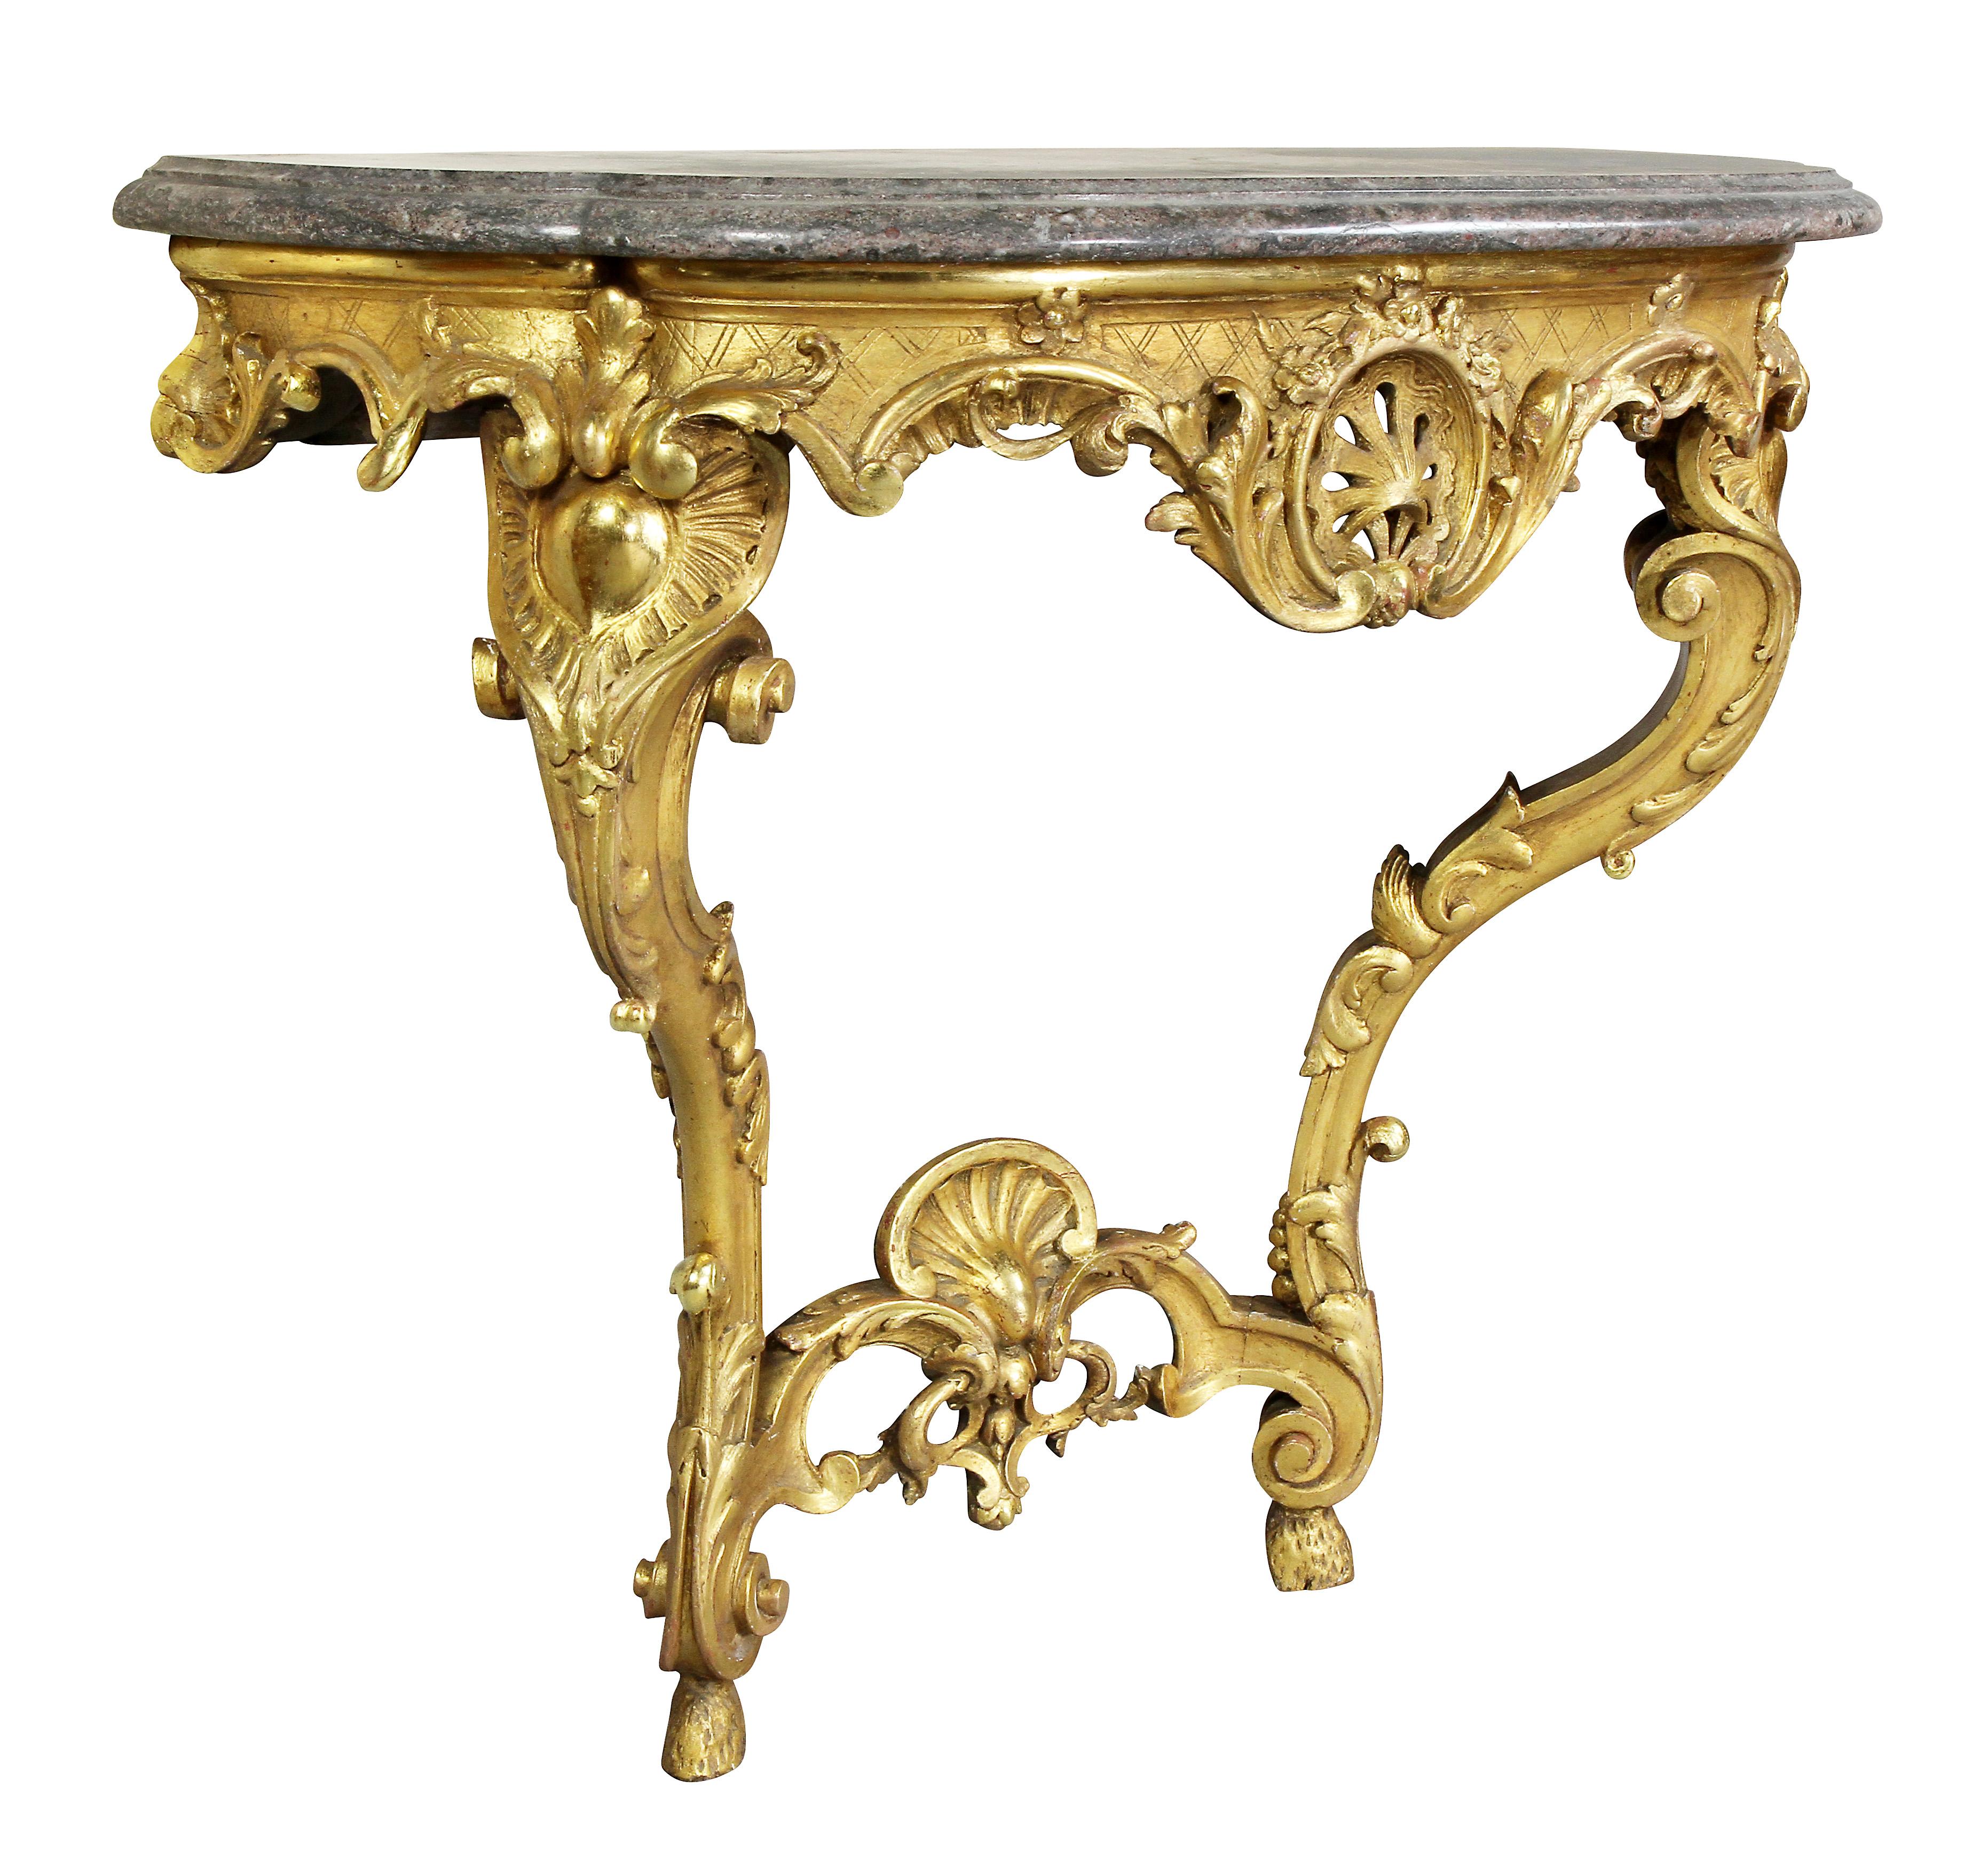 With shaped bowed marble top over a conforming carved base with central carved and pierced design surrounded by trailing leaves and flowers, cabriole legs with lower stretcher.